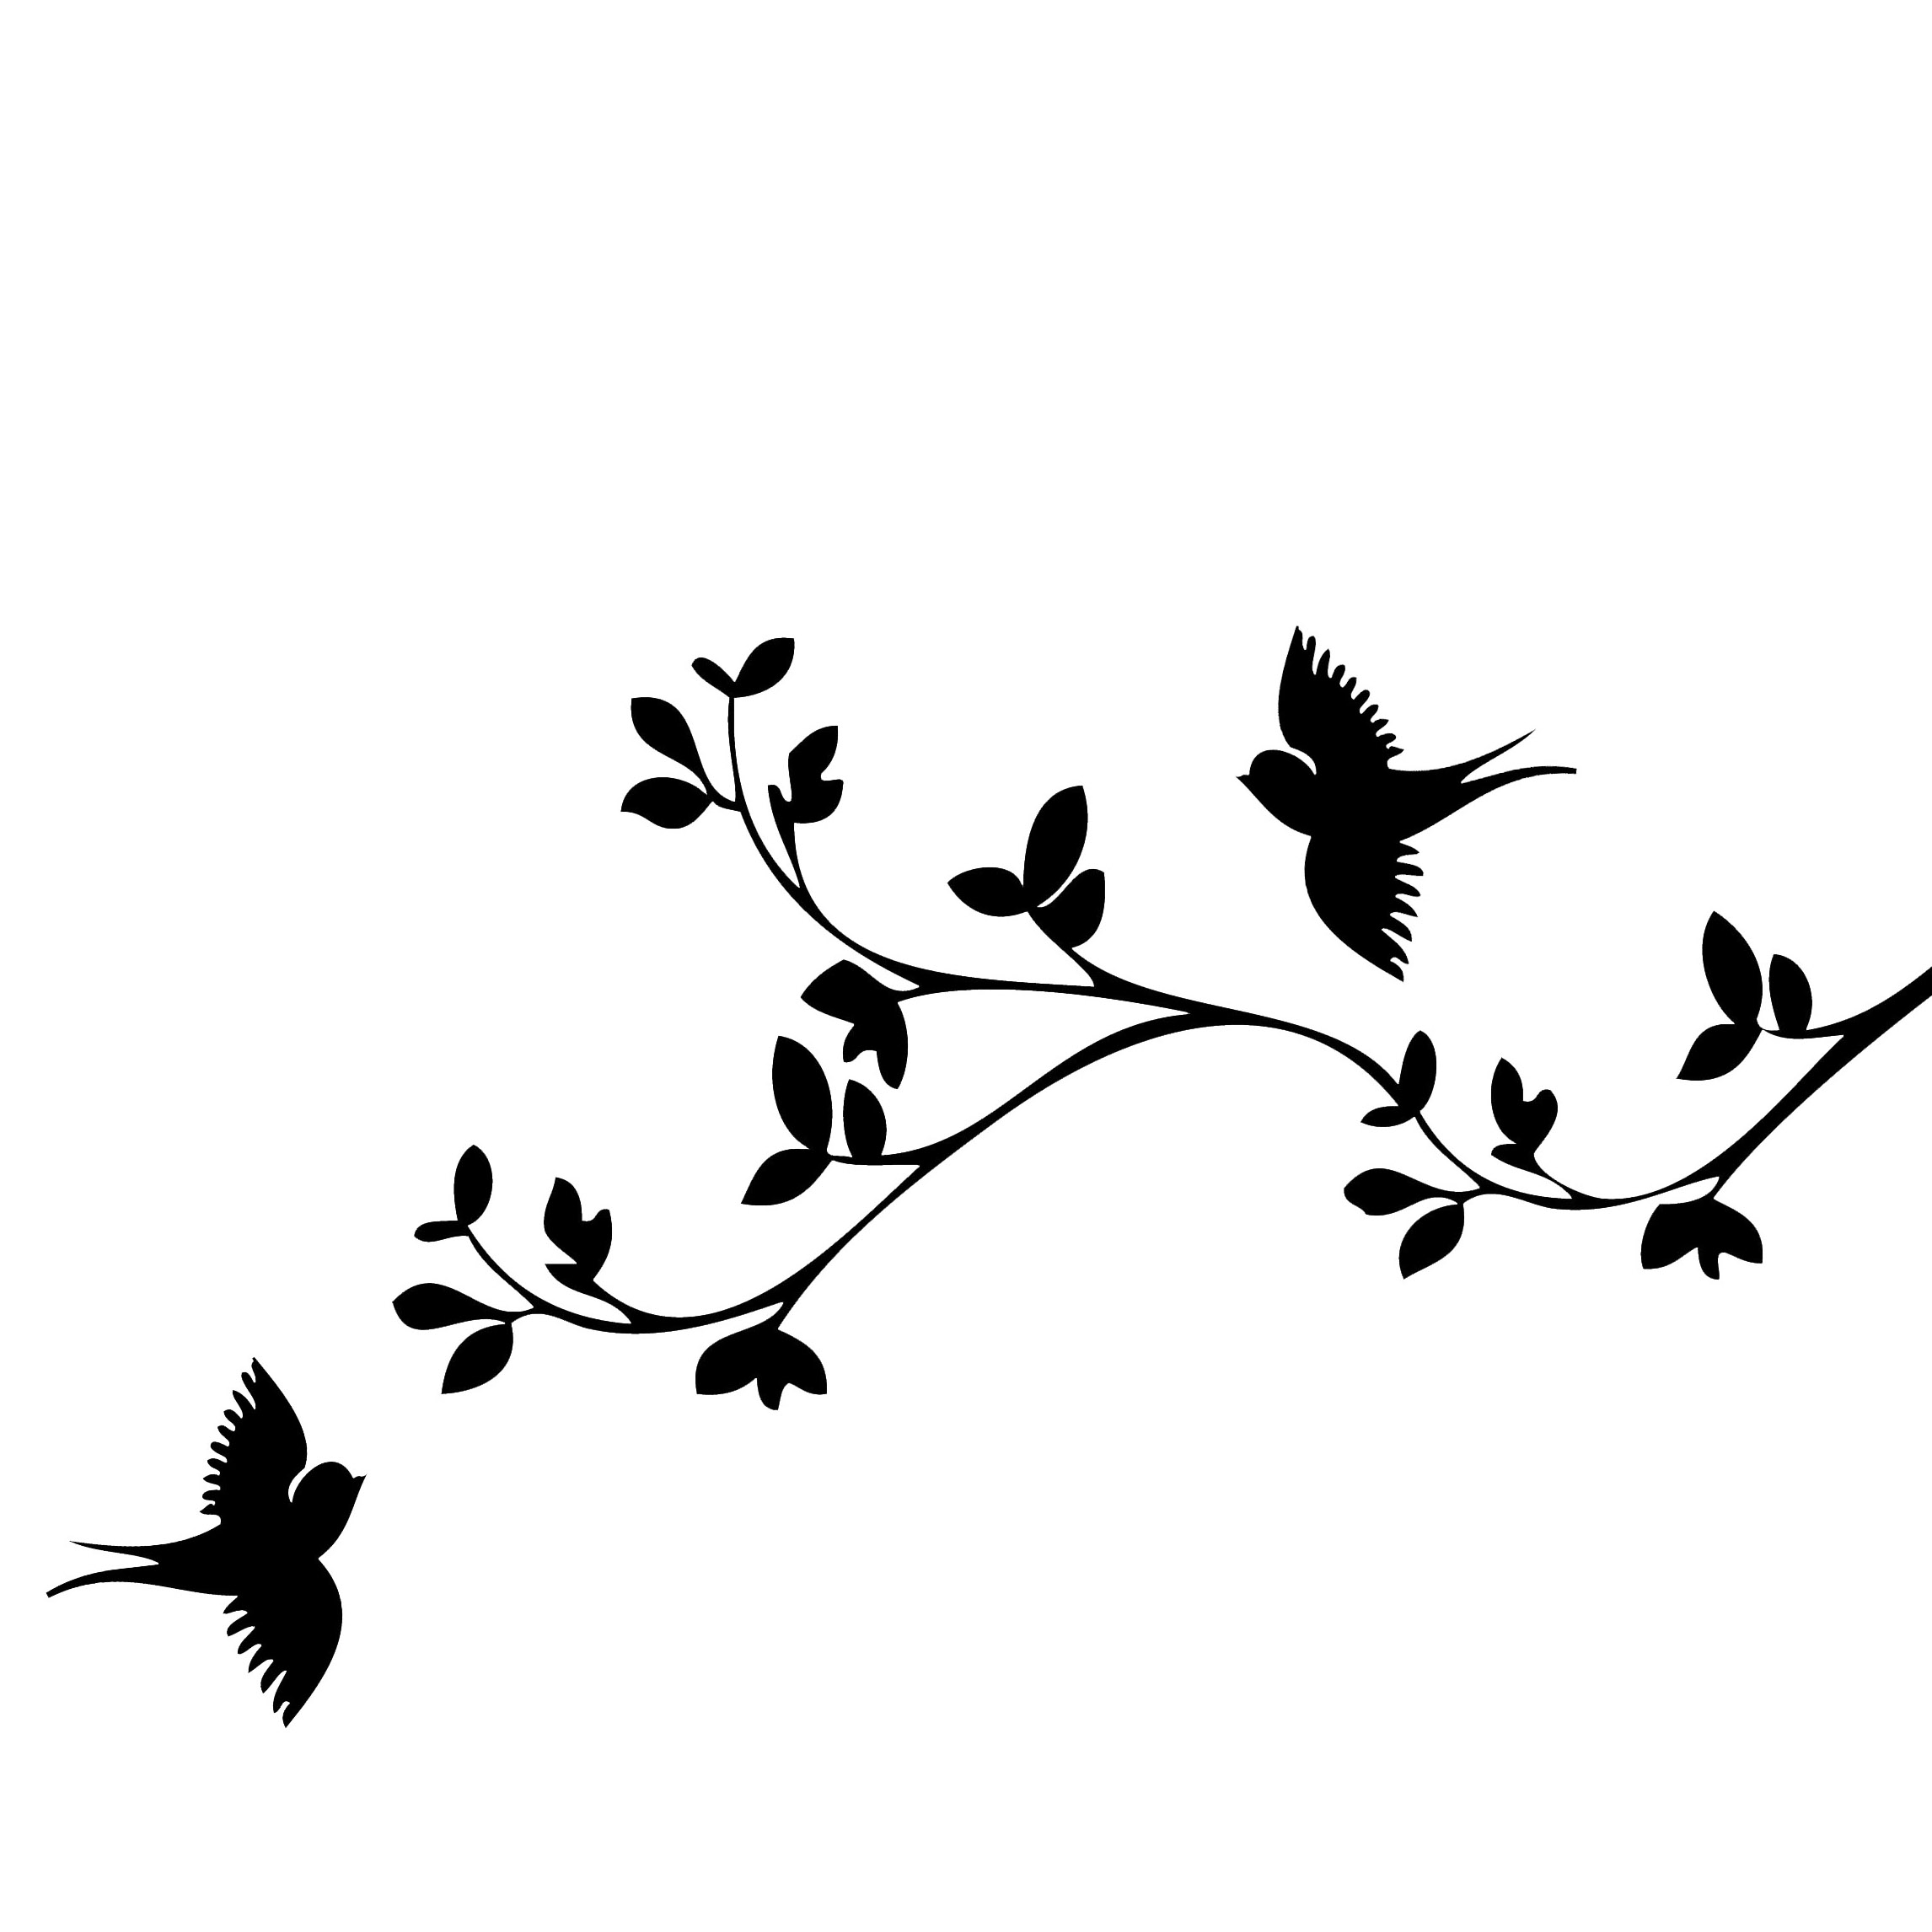 Trees, Bird drawings and Branches